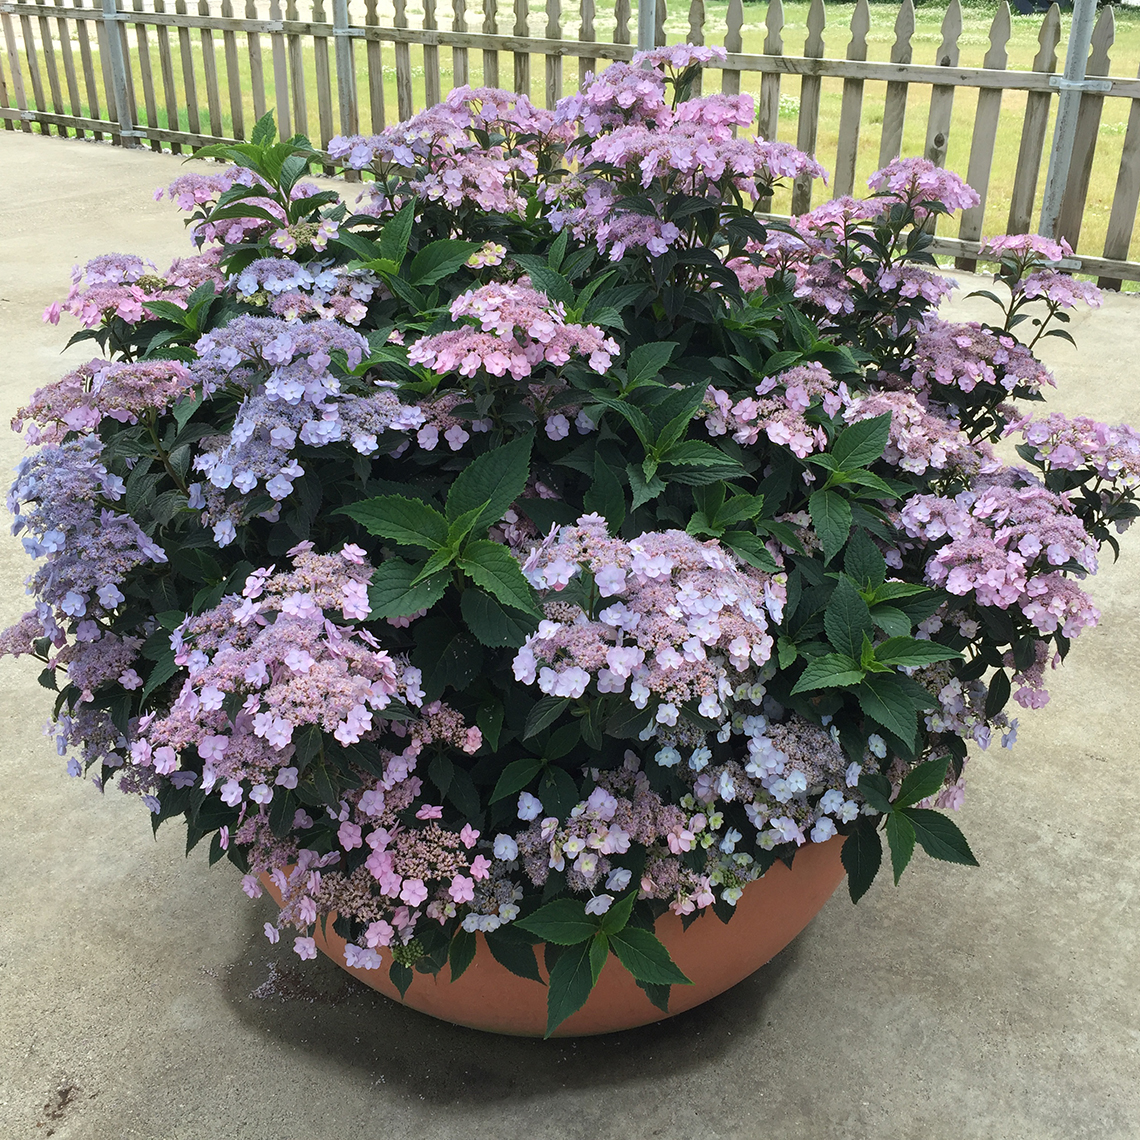 A specimen of Tiny Tuff Stuff mountain hydrangea blooming in a large decorative container